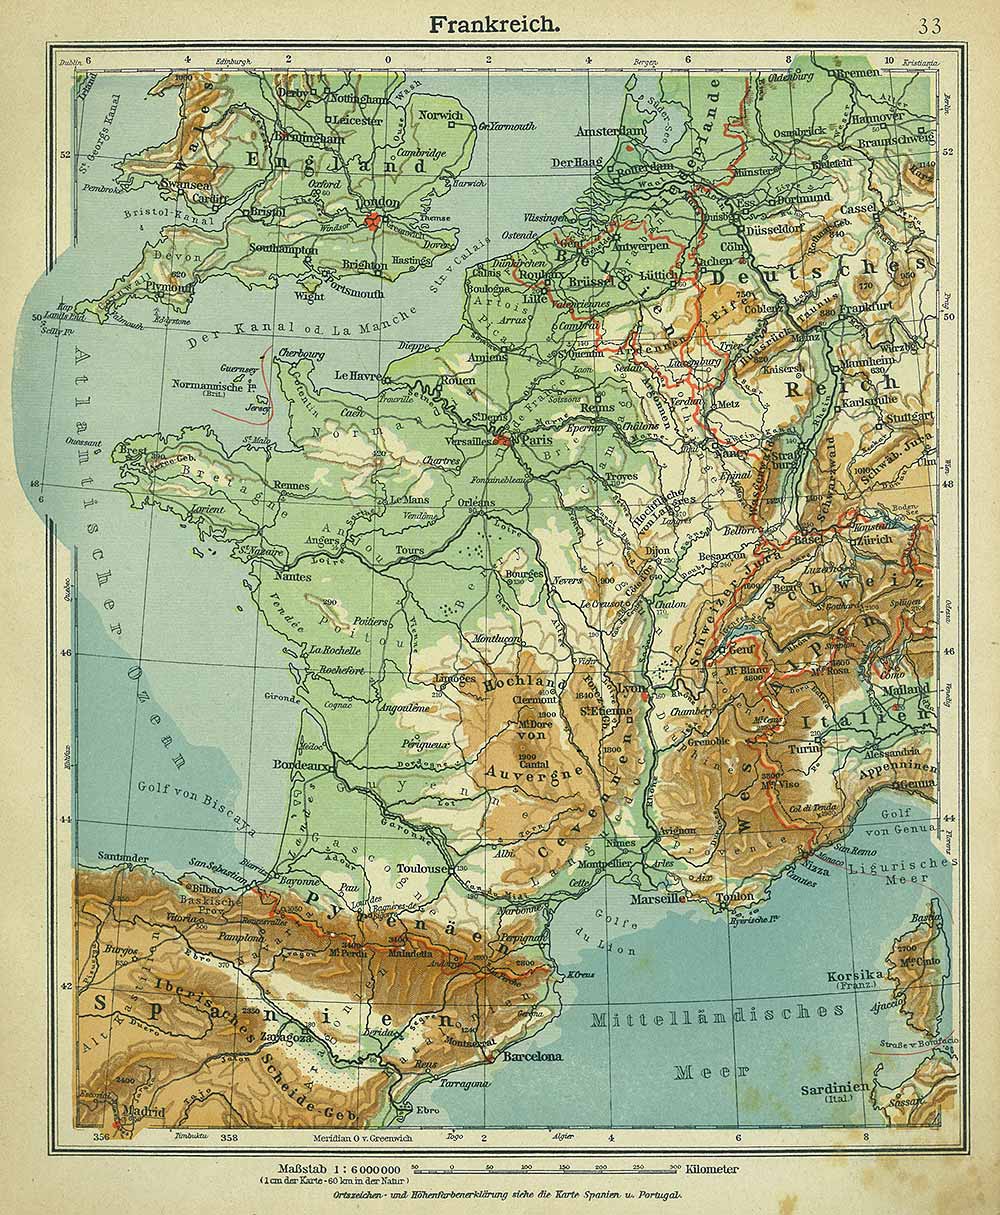 France map, Andrees 'Berliner Schul-Atlas', 1916, page 33, published size to print borders 21.46 cm wide by 26.58 cm high.